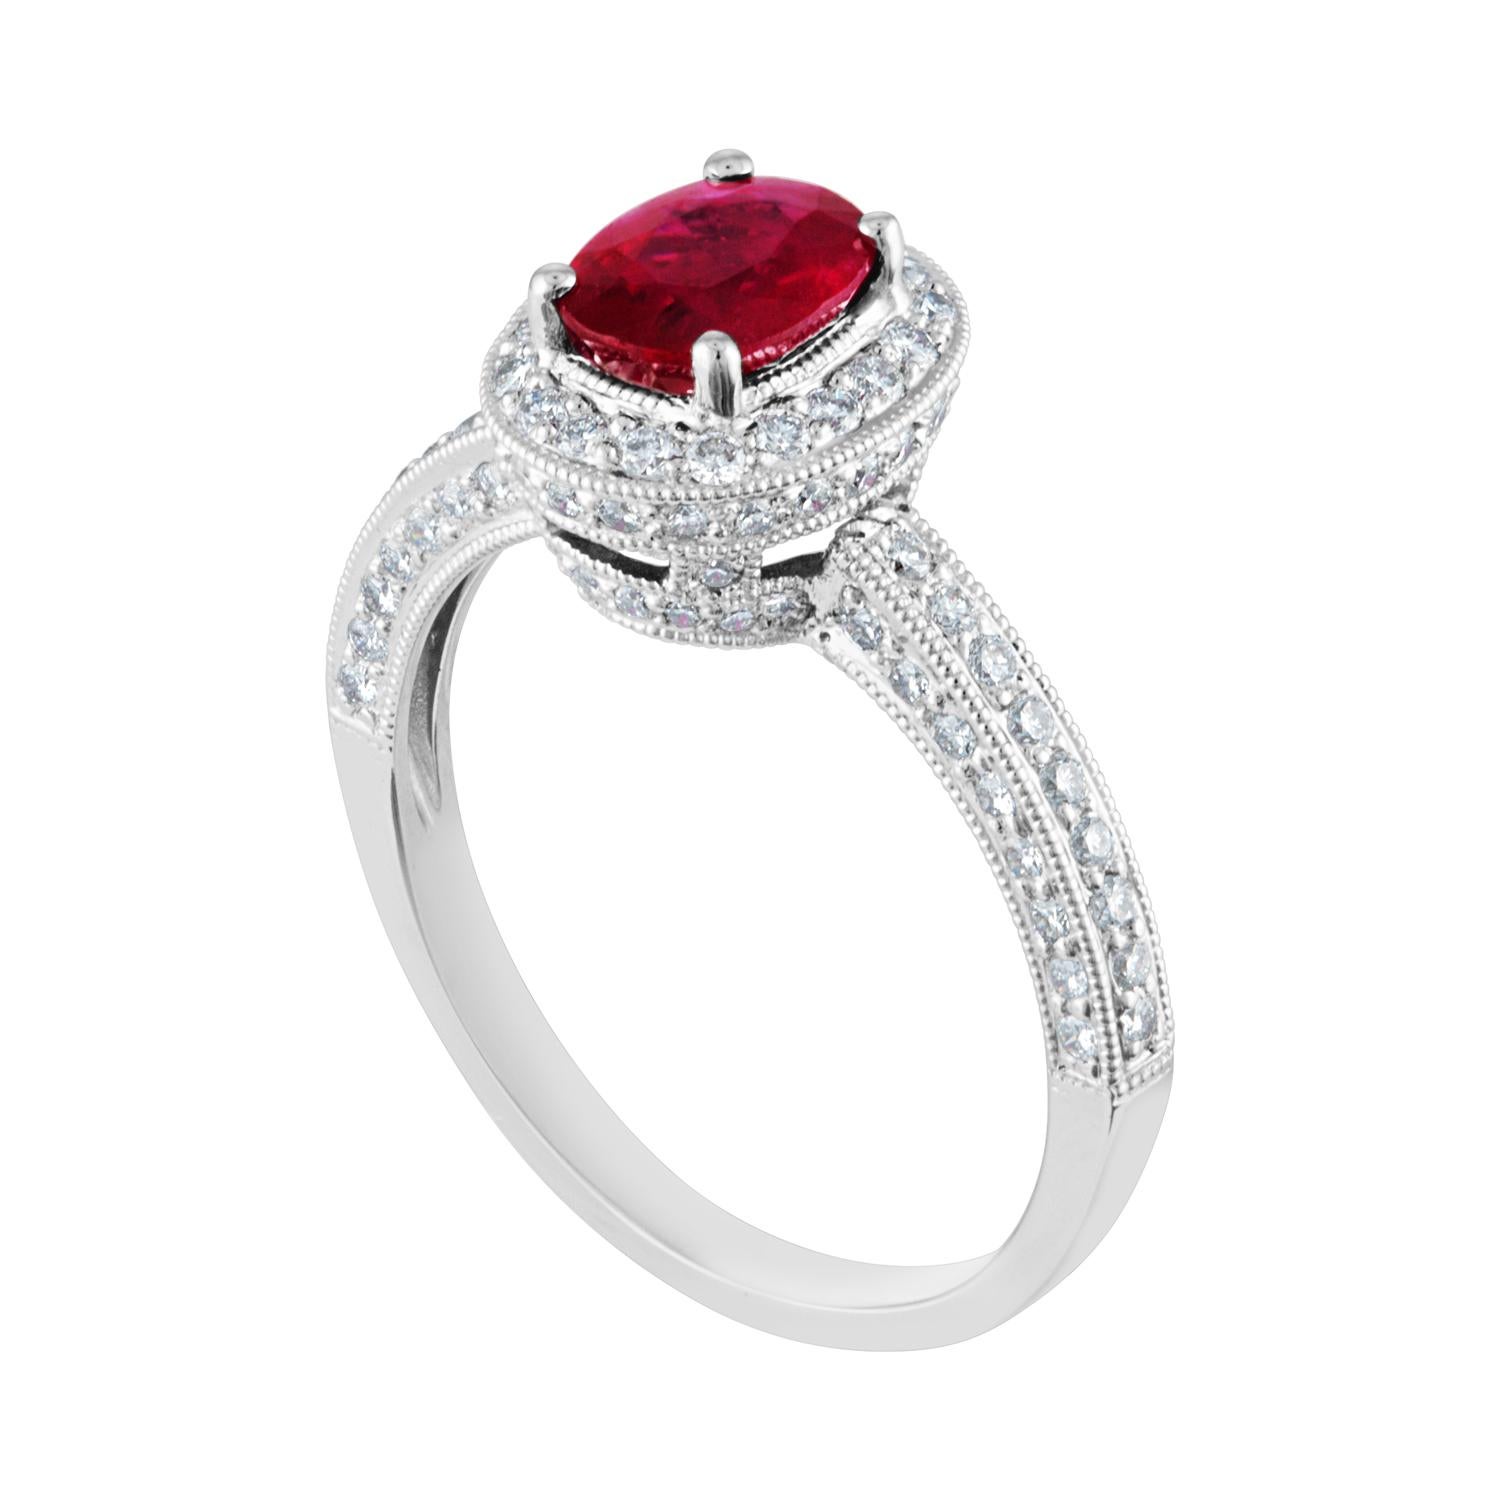 Oval Halo Milgrain Engagement Ring
The ring is 18K White Gold
The oval Burma ruby is 1.29 Carats
There are 0.75 Carats In Diamonds G/H SI
The ring weighs 4.2 grams
The ring is a size 8.0, sizable